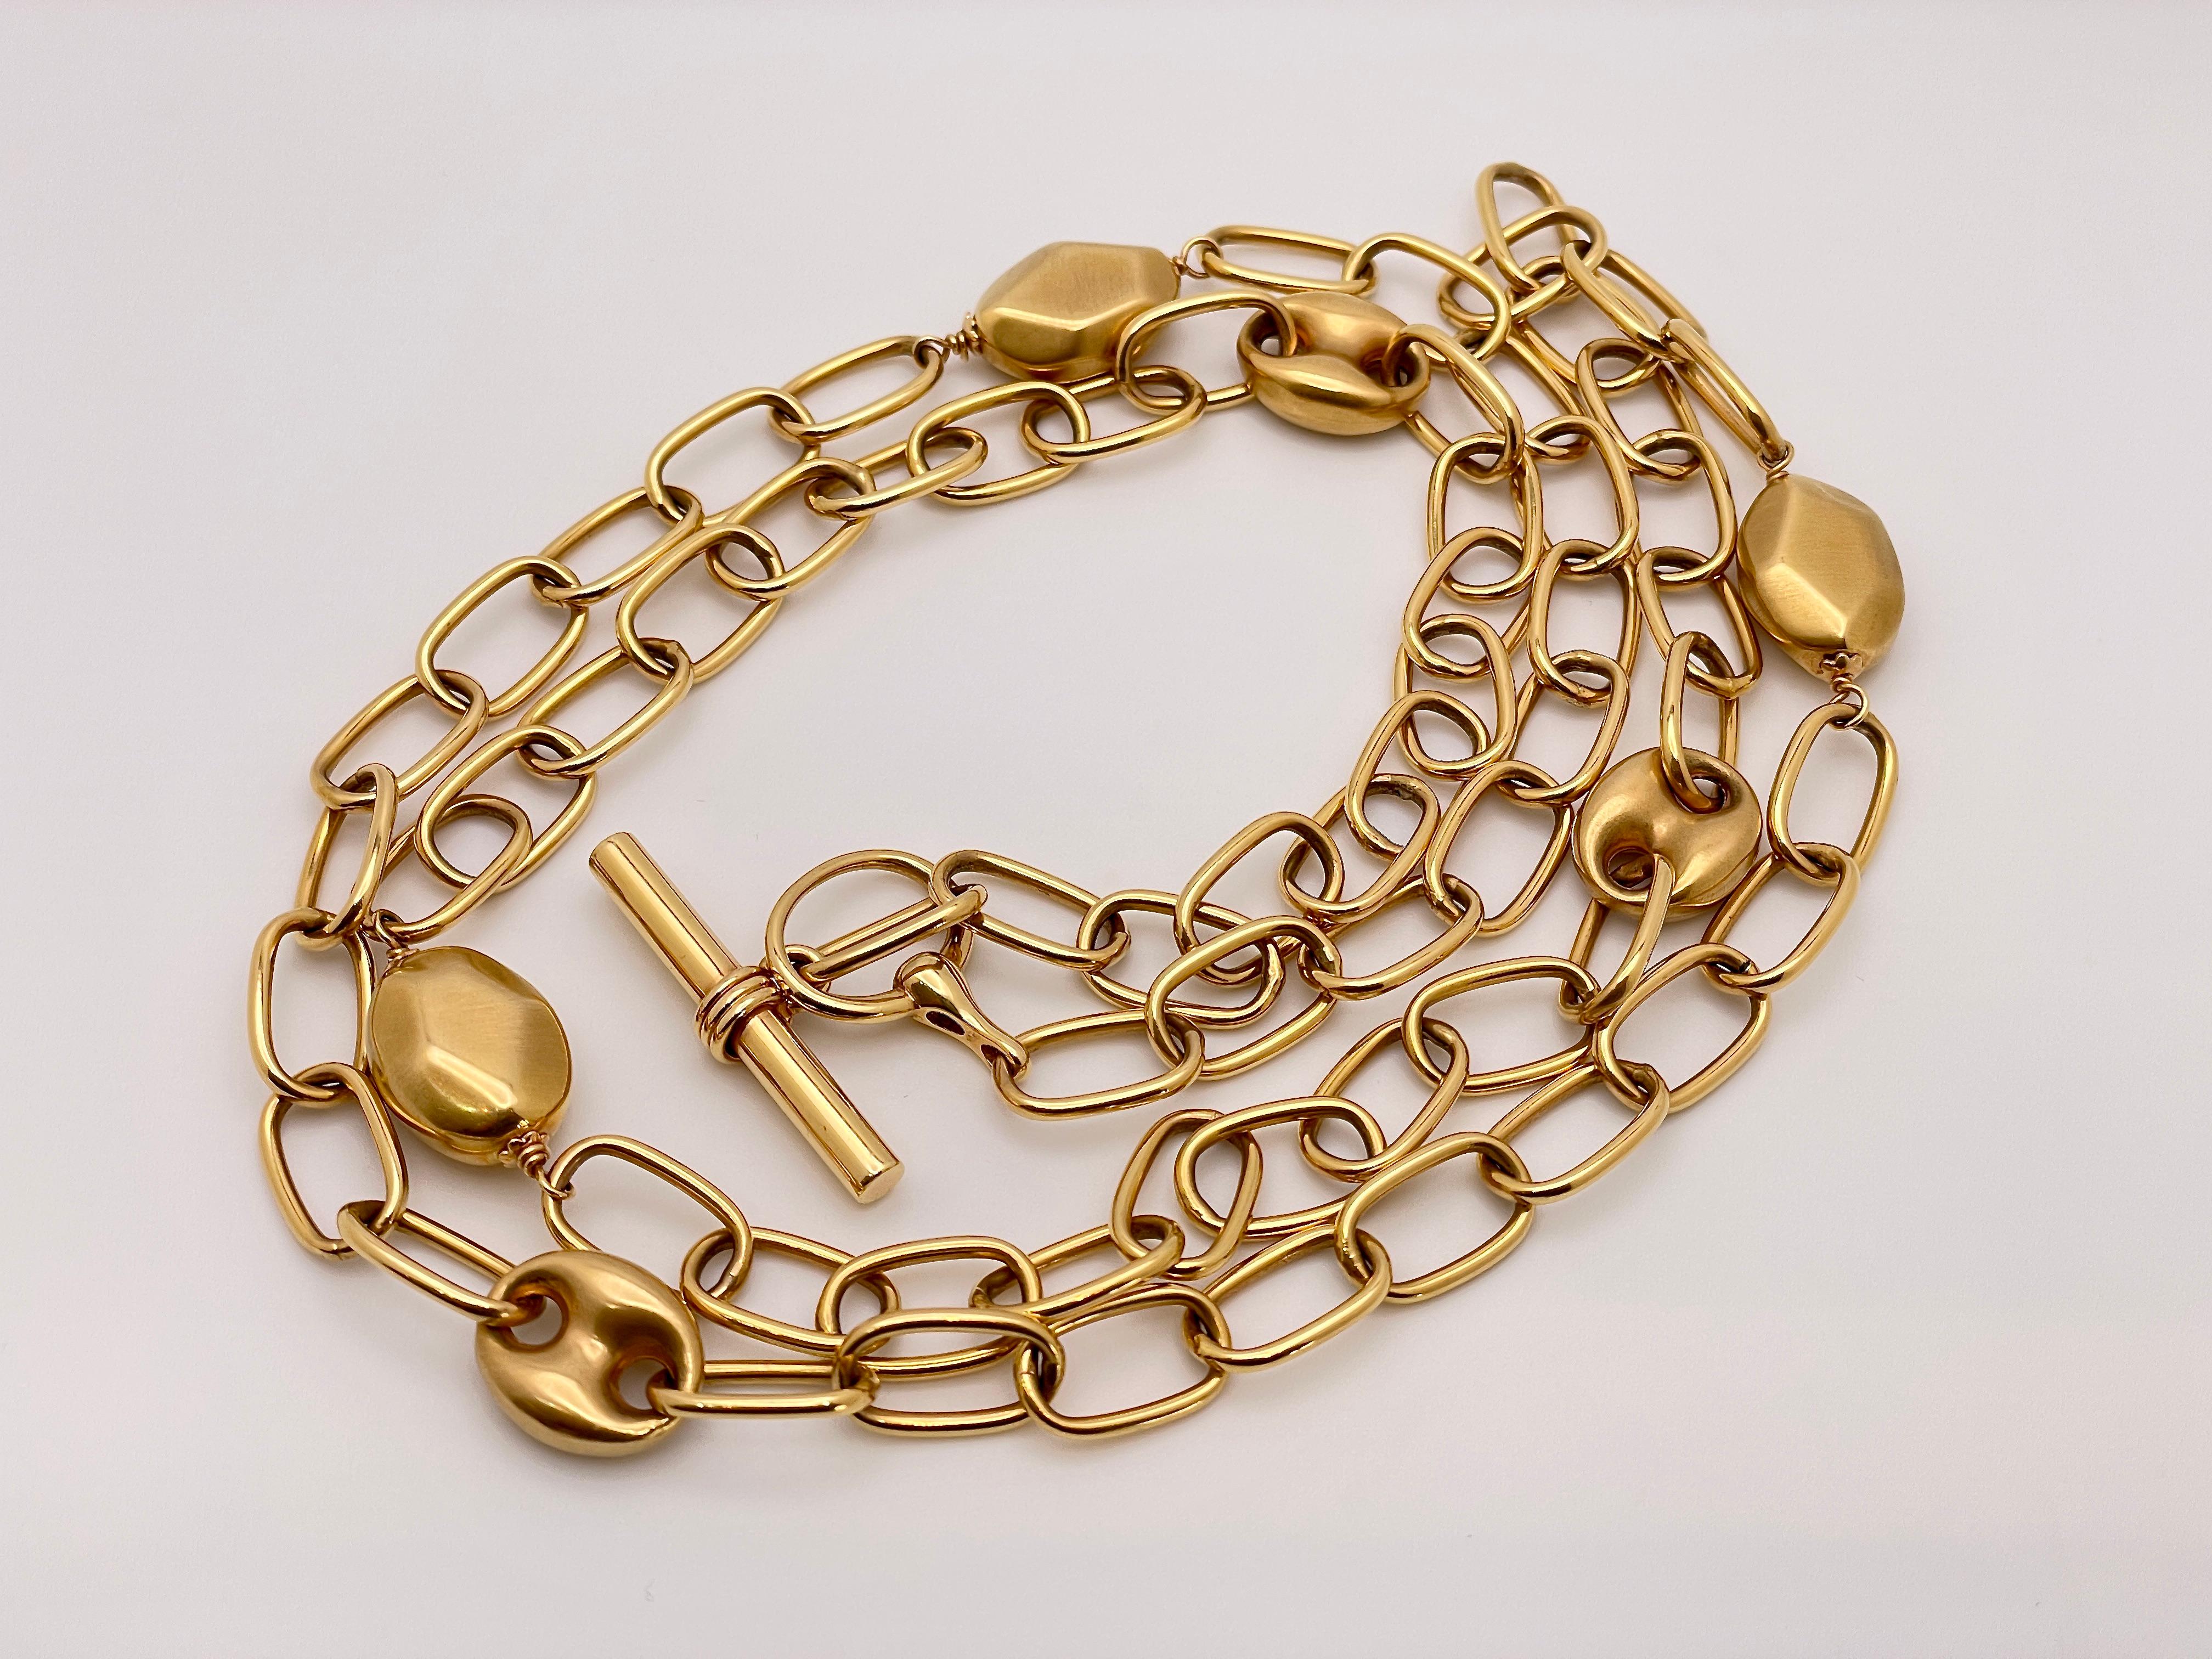 A magnificent 18K rose gold handmade toggle clasp link necklace, featuring a Gucci design. The necklace is decorated with multifaceted gold beans and Gucci designed links. This elegant necklace measures 35 inches, and has a gross weight of 51 grams. 